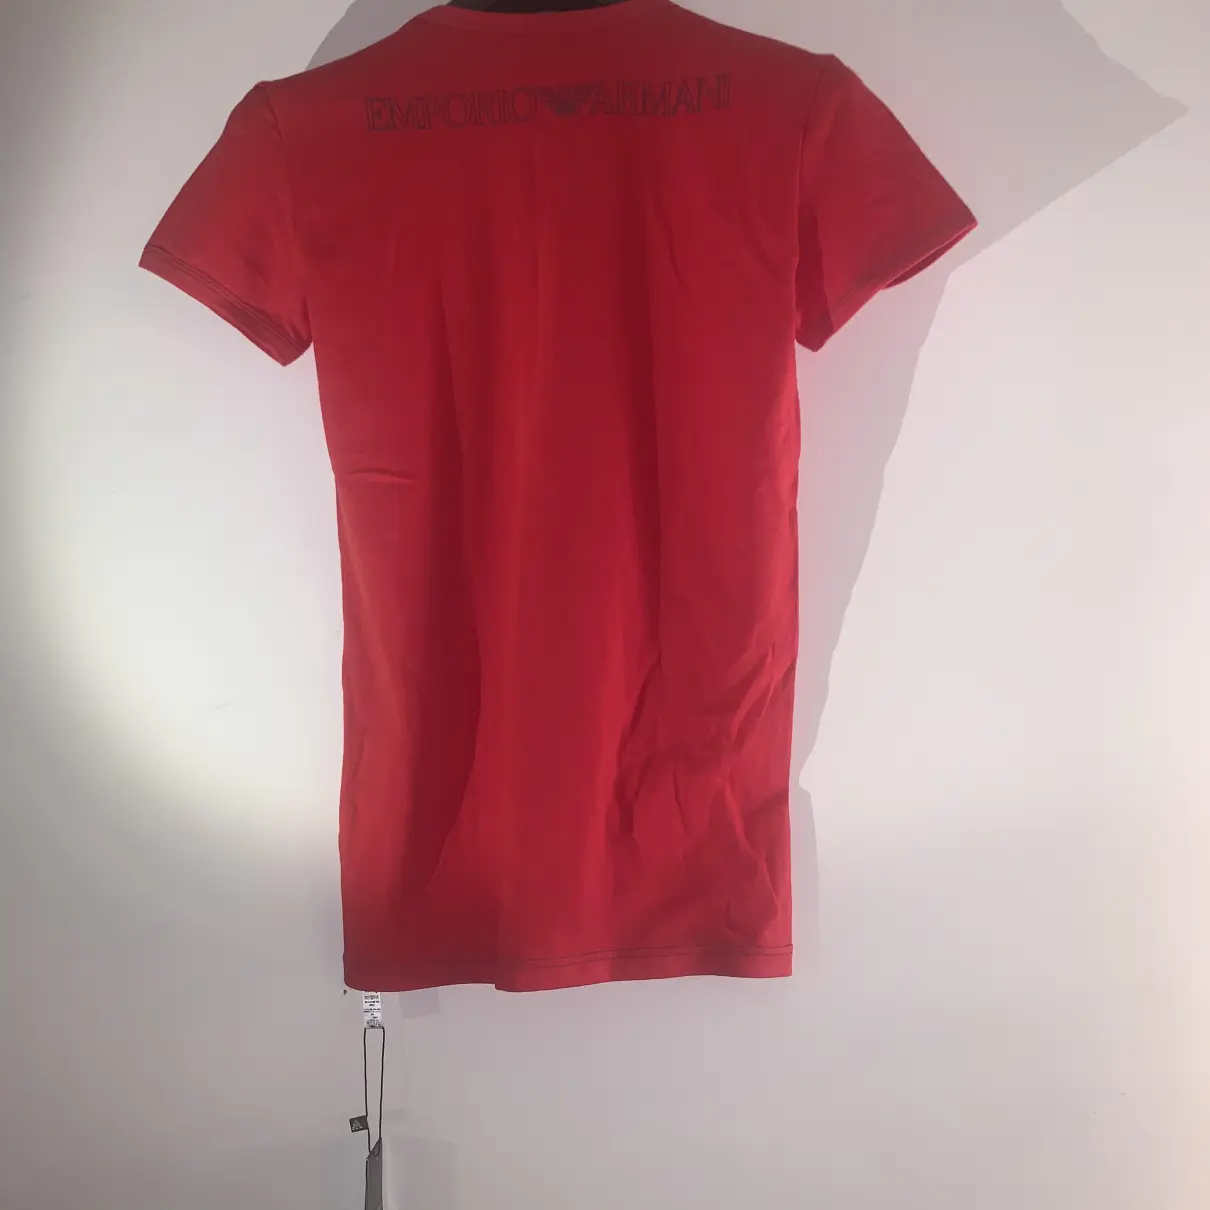 Buy Emporio Armani Red Cotton T-shirt online